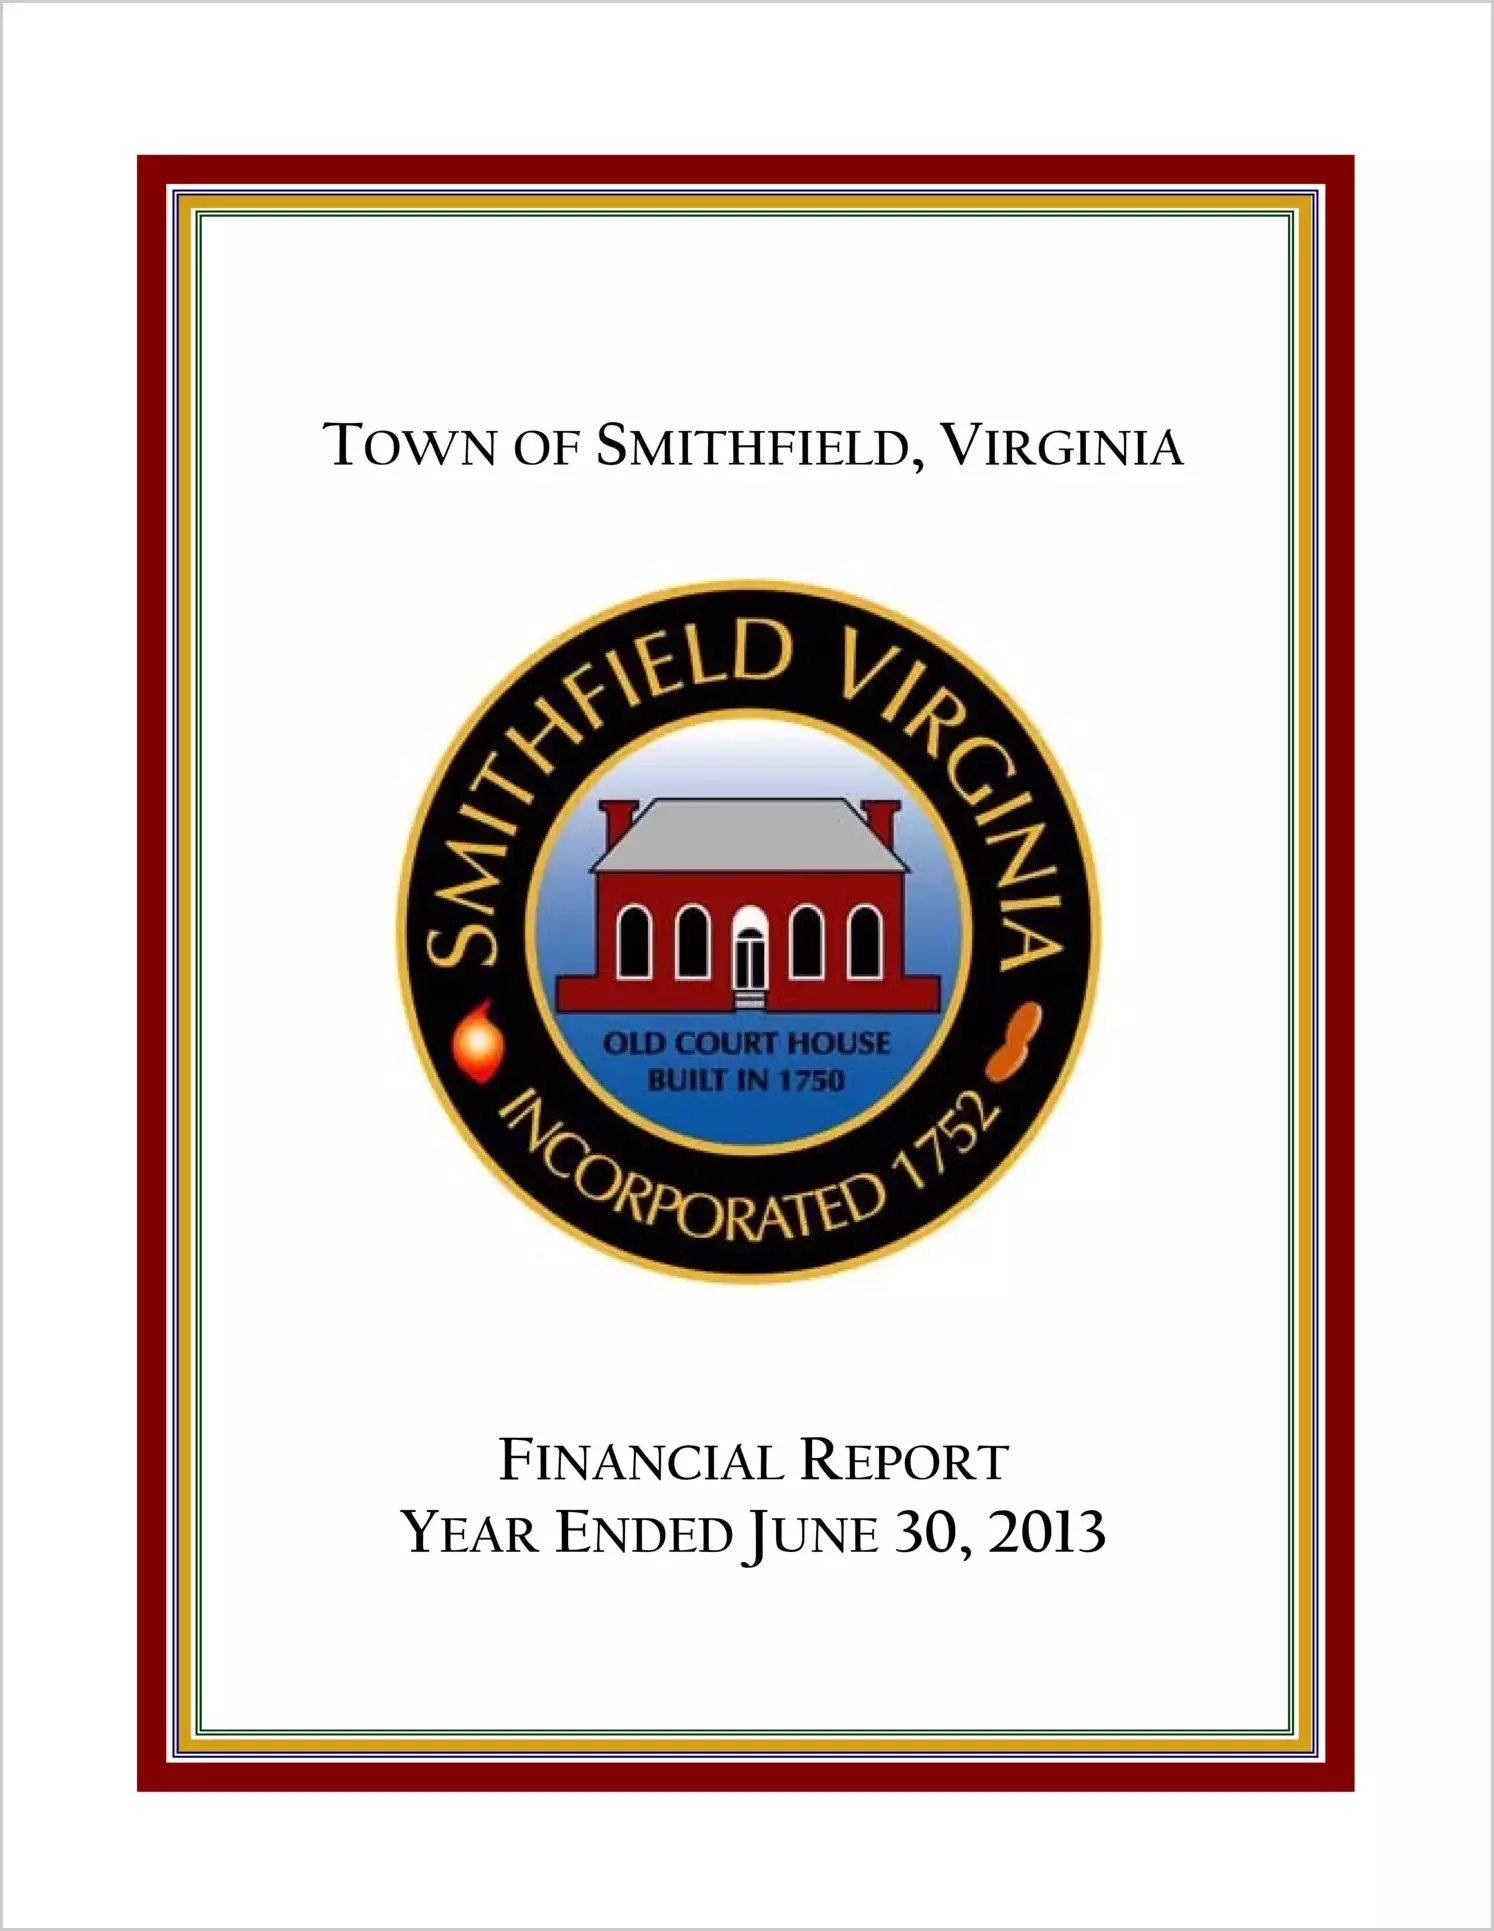 2013 Annual Financial Report for Town of Smithfield